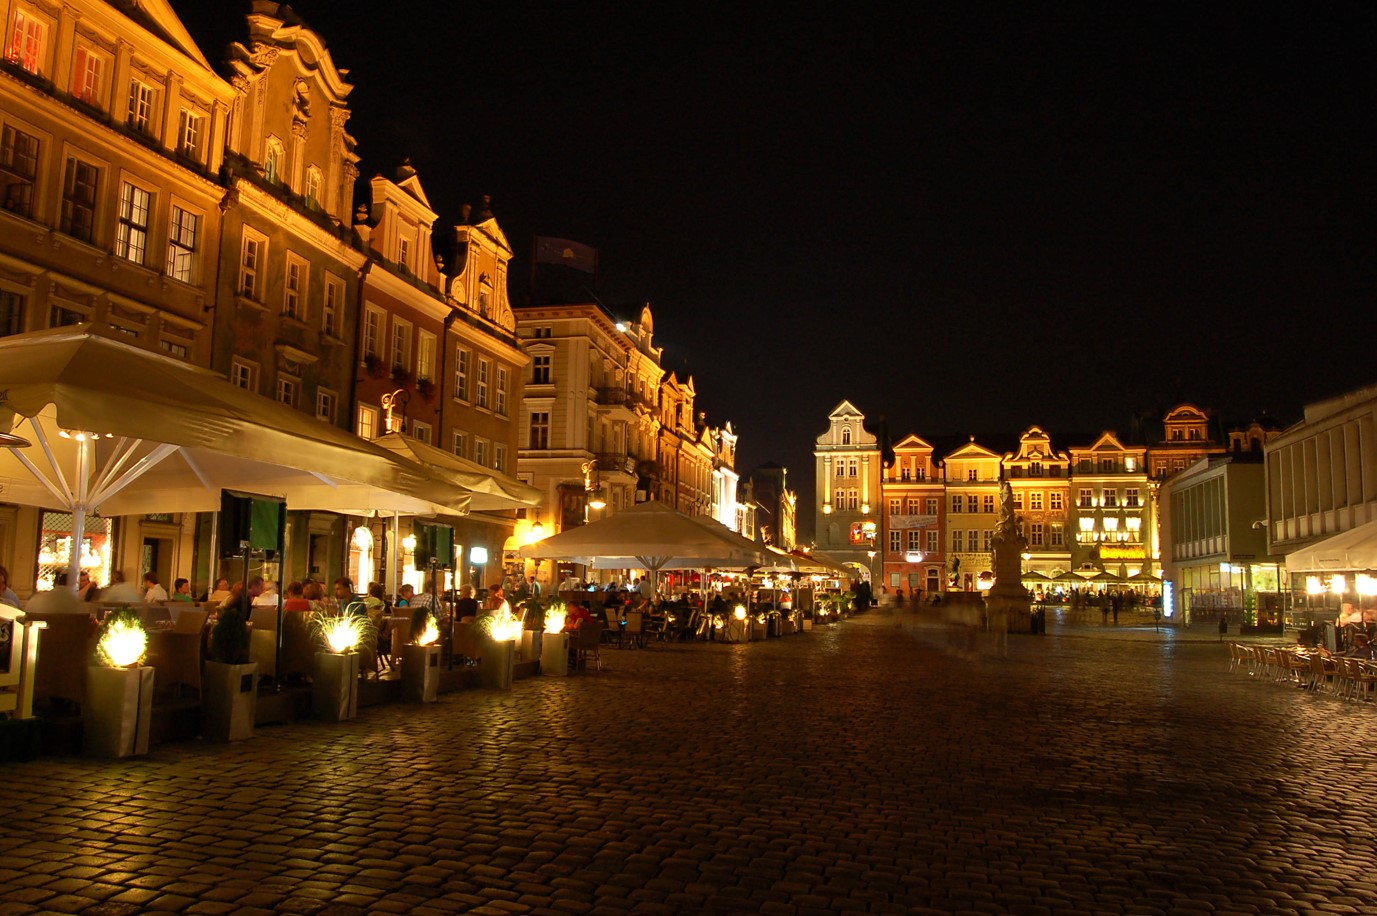 Old Market Square at night